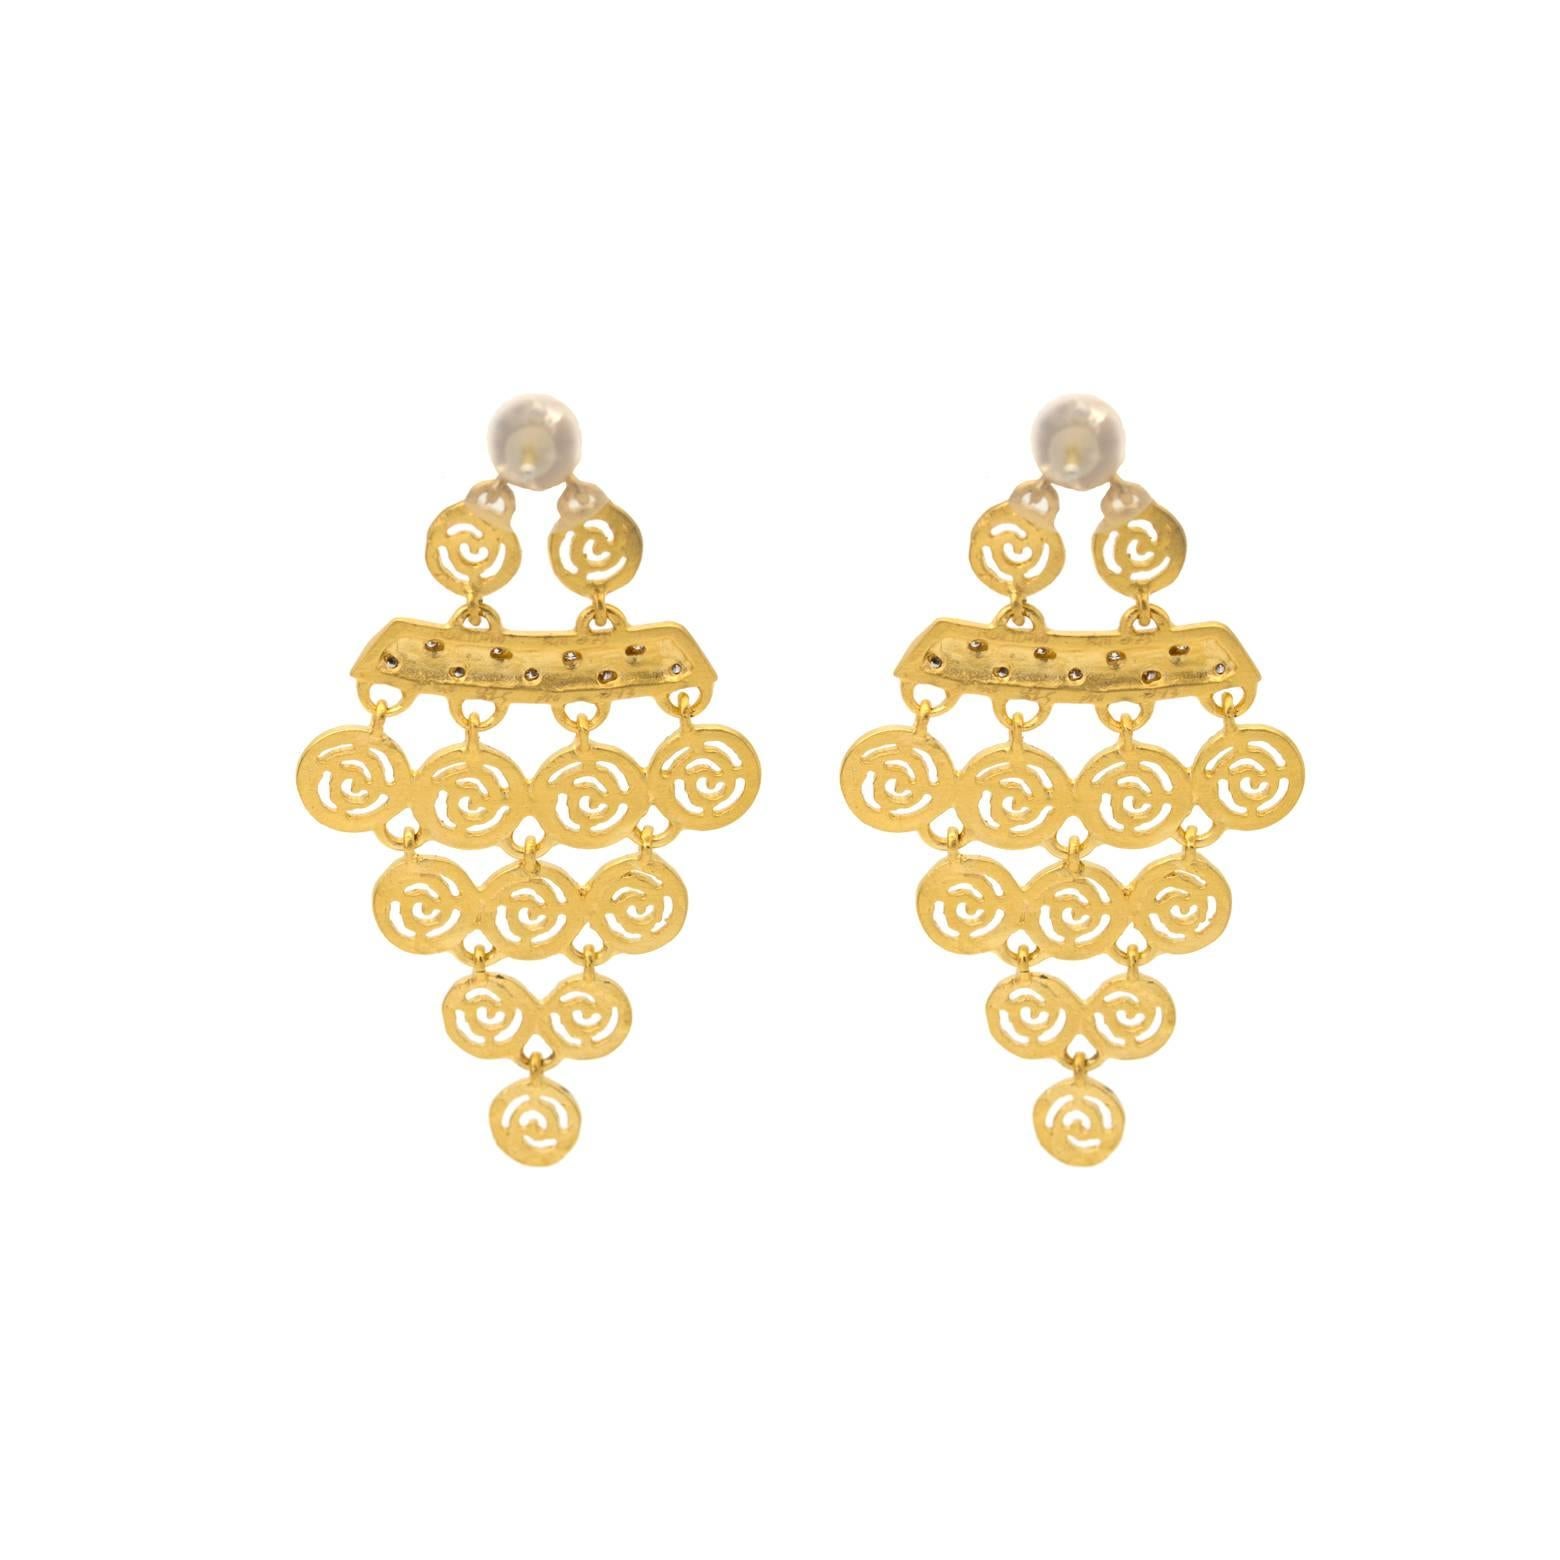 These elegant and glamorous dangle earrings have 18 diamonds total with a satin matte finish on the gold. A beautiful texture as if dipped in gold and accented with 0.13 total weight in diamonds. 